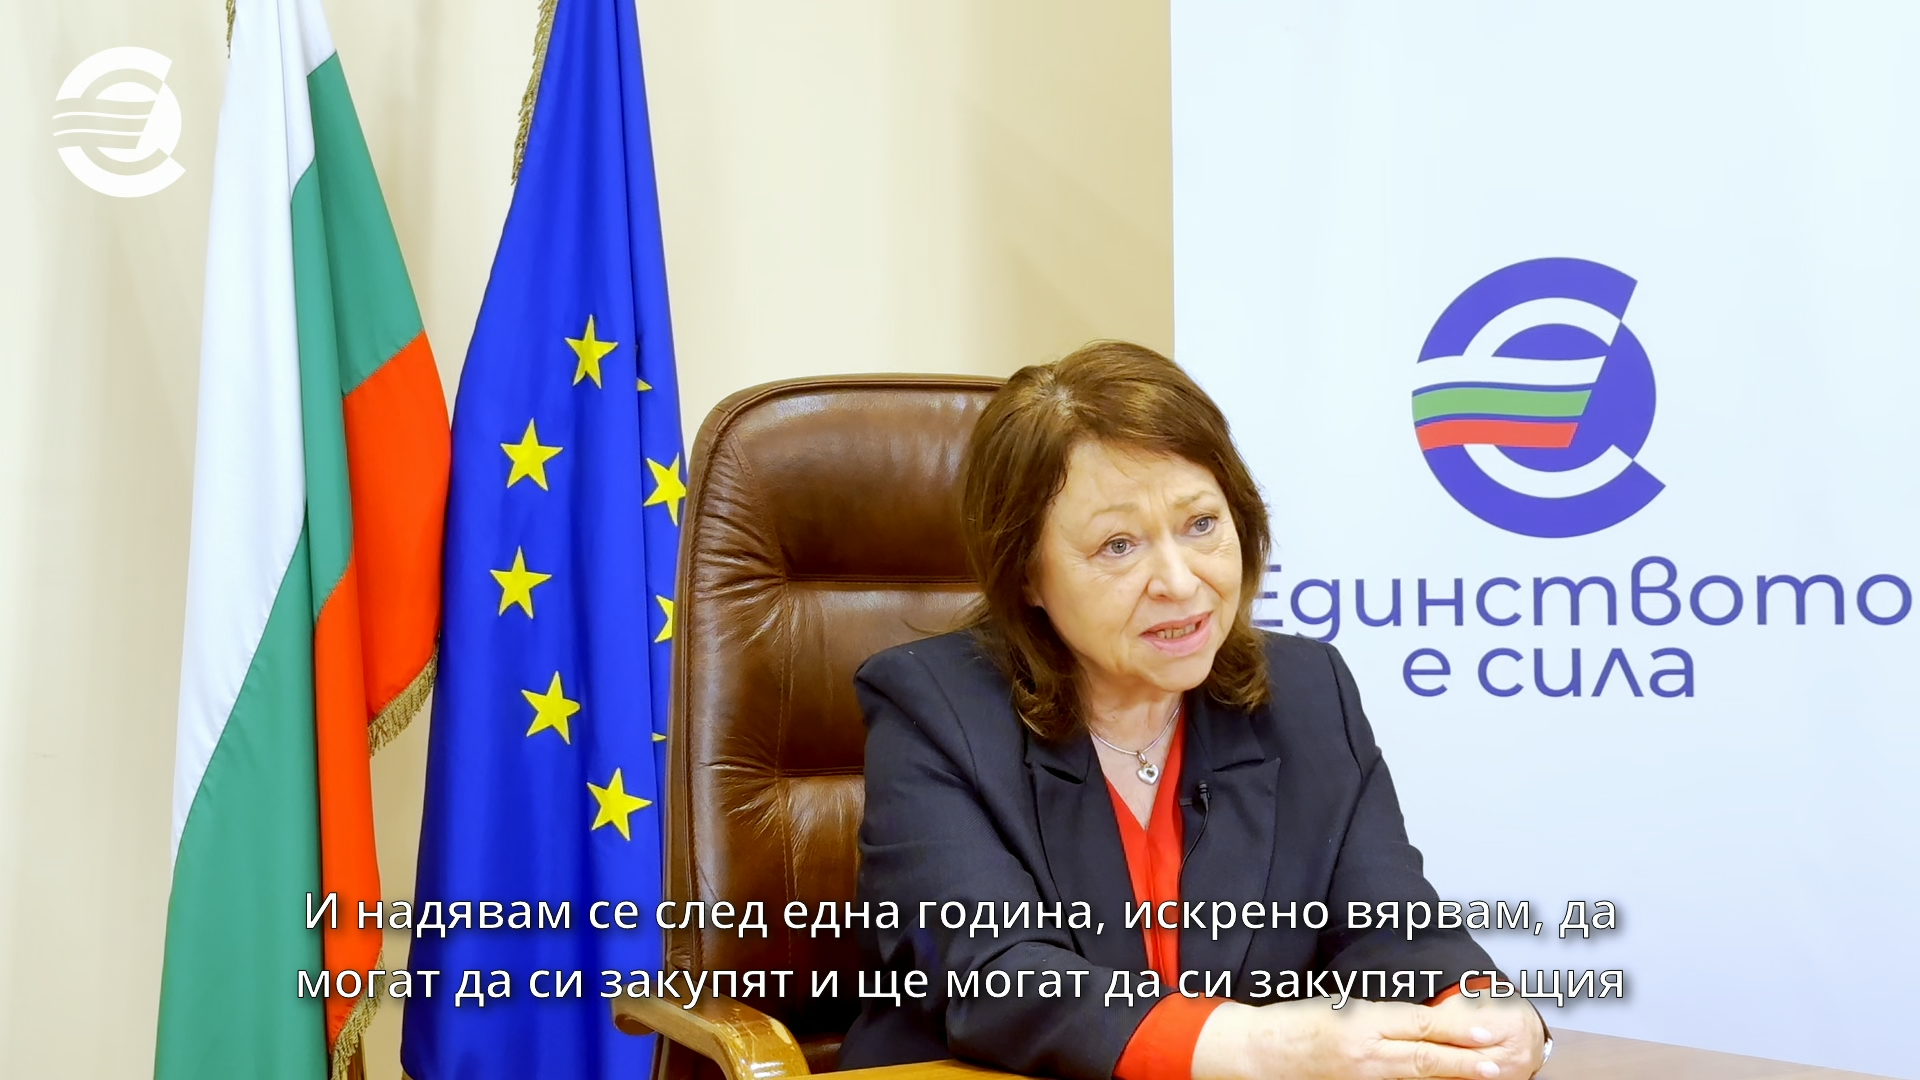 Hristina Hristova, former Social Minister: The people should be assured that they will buy the same amount of goods and services when they pay in euro